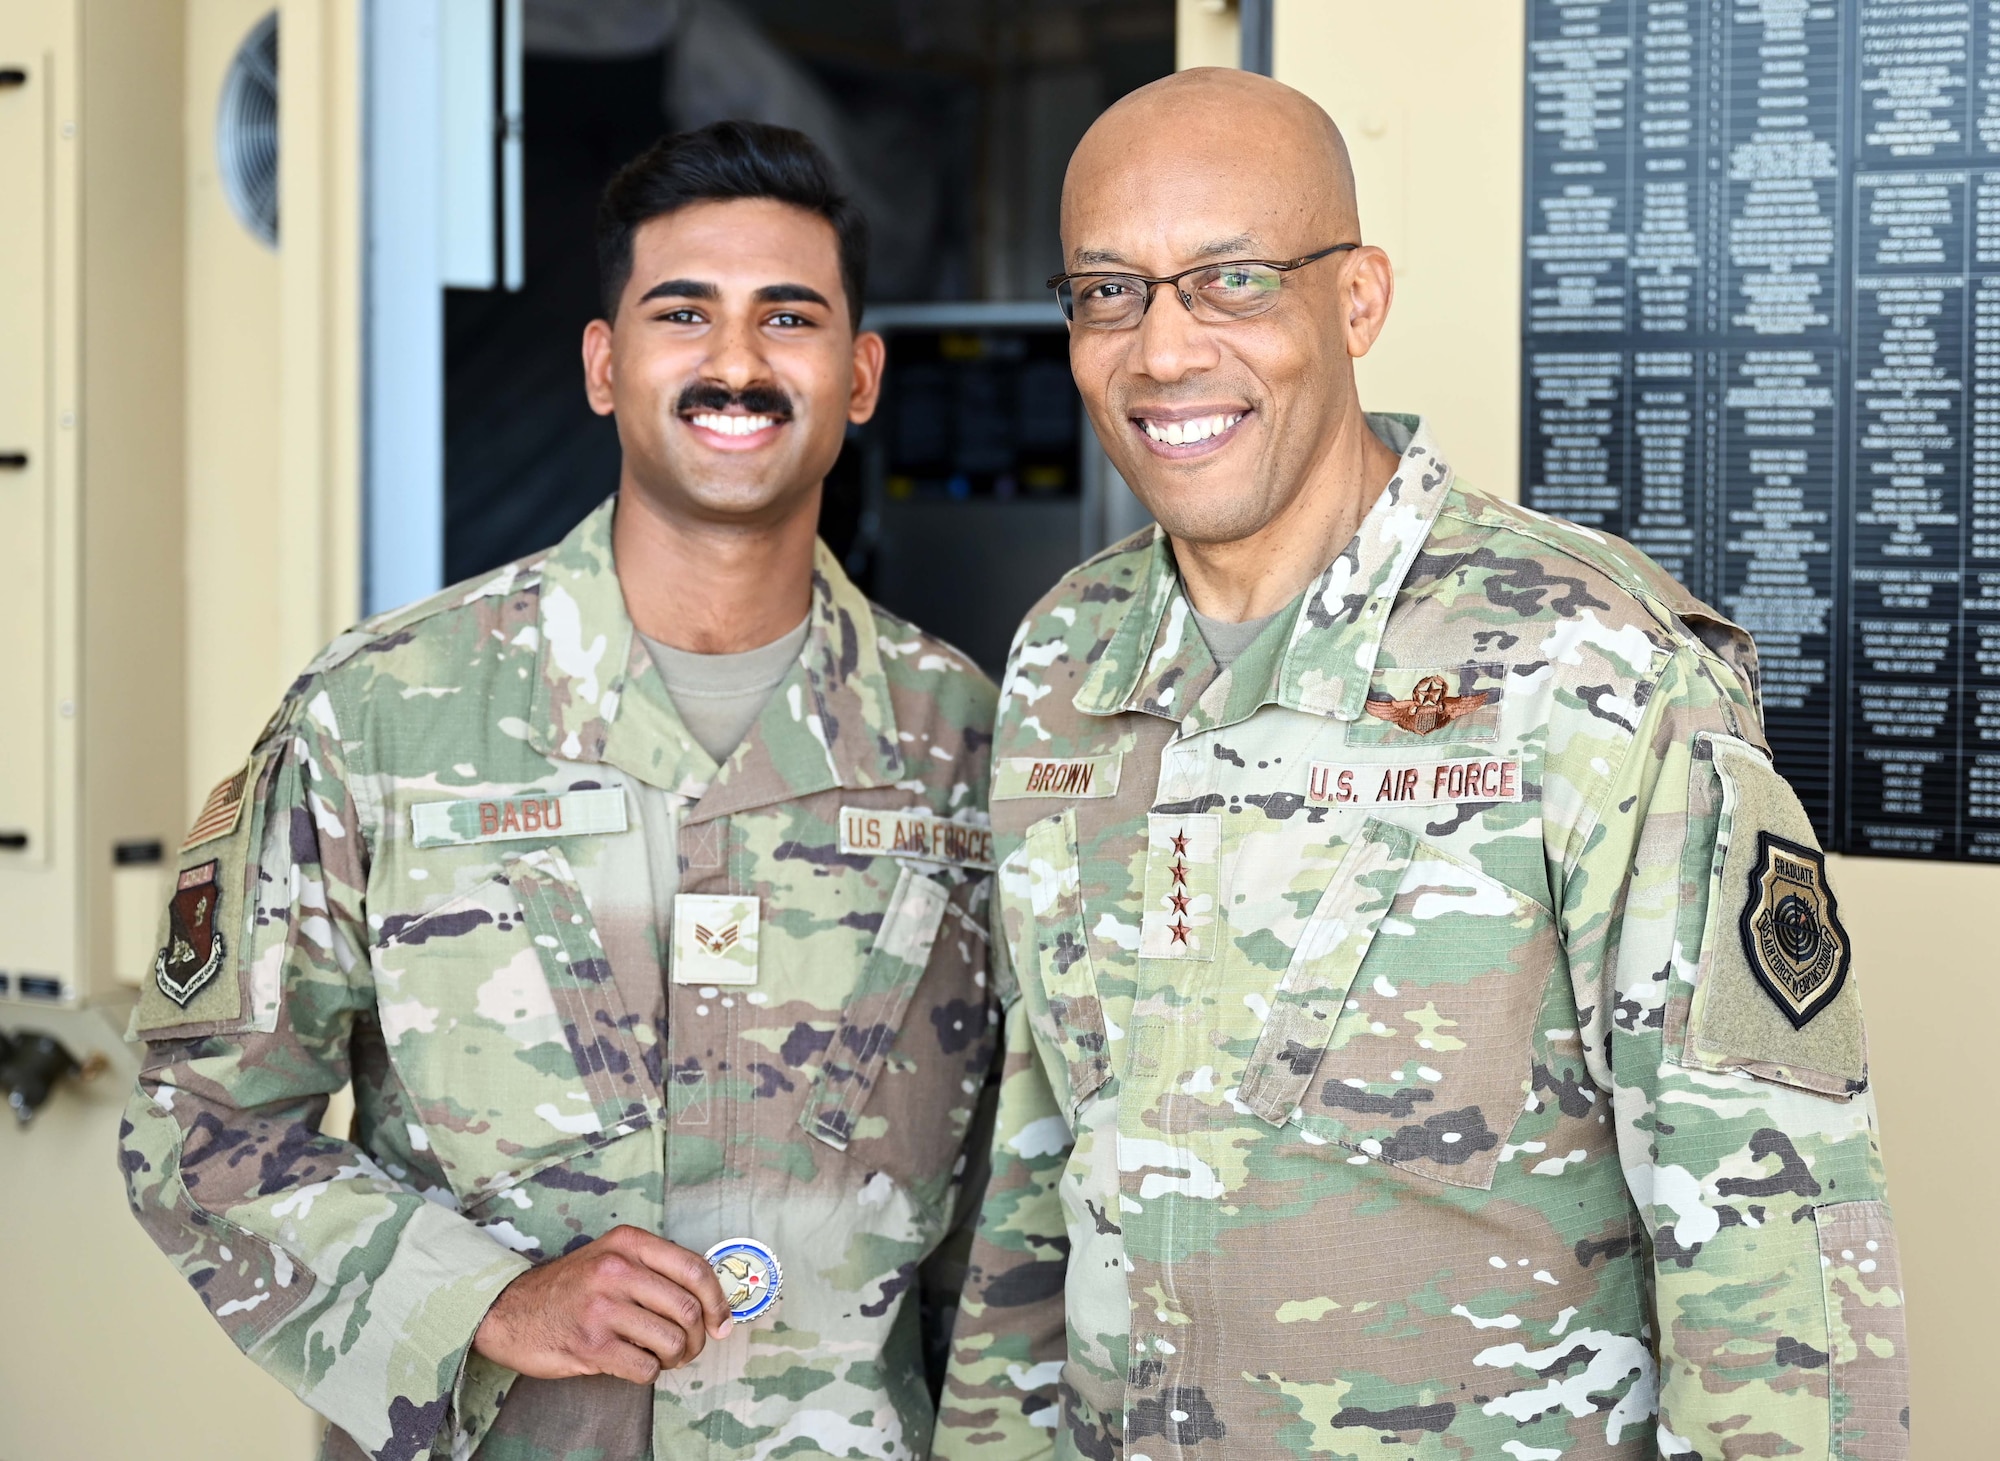 Air Force Chief of Staff Gen. CQ Brown, Jr., presents a coin to U.S. Air Force Senior Airman Abel Babu, cargo movement specialist with the 27th Special Operations Mission Support Group, Detachment 1, Cannon Air Force Base, New Mexico, during his visit to Hurlburt Field, Florida, April, 4, 2022. During his visit, Brown also received command updates from Headquarters Air Force Special Operations Command staff and briefings on Mission Sustainment Teams, Aviation Special Operations Task Units and Special Operations Task Groups. (U.S. Air Force photo by Staff Sgt. Brandon Esau)